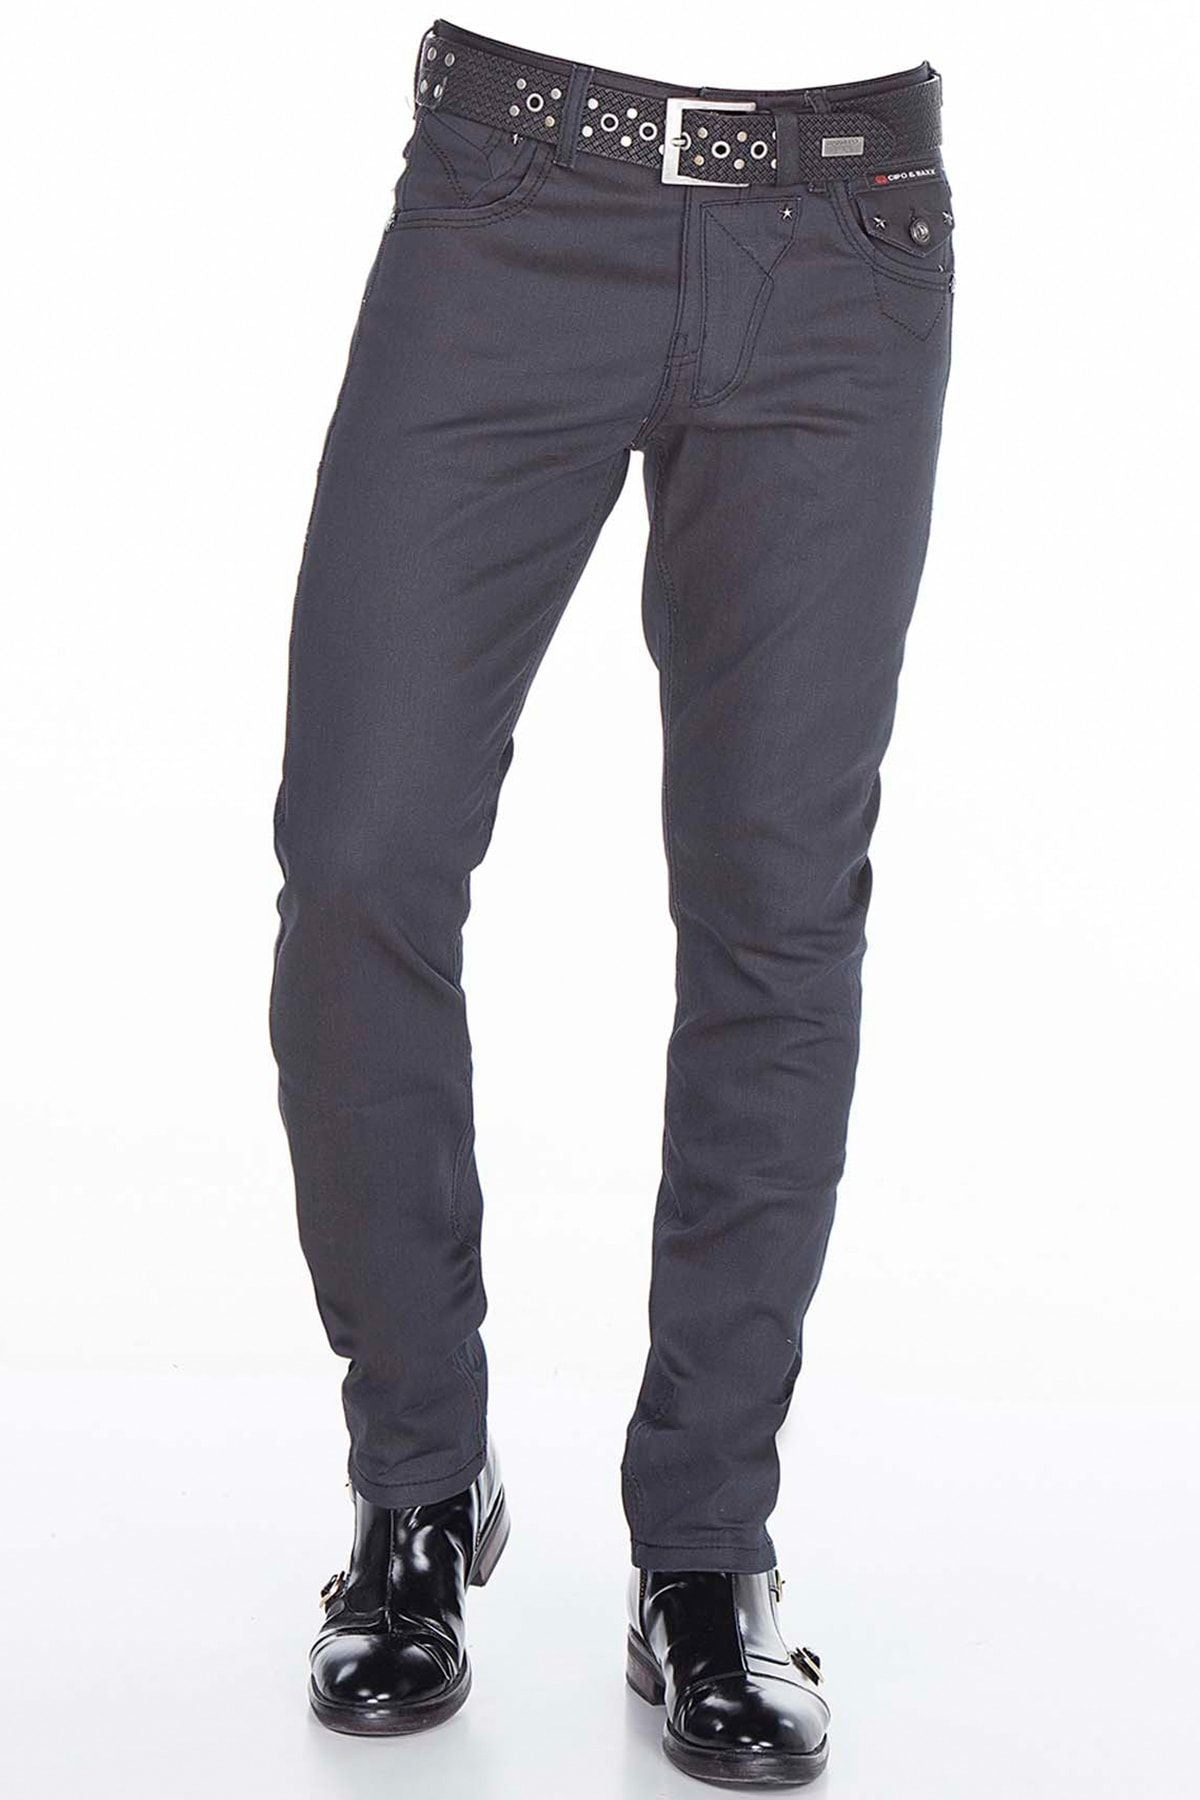 CD398 men's comfortable jeans in a modern look